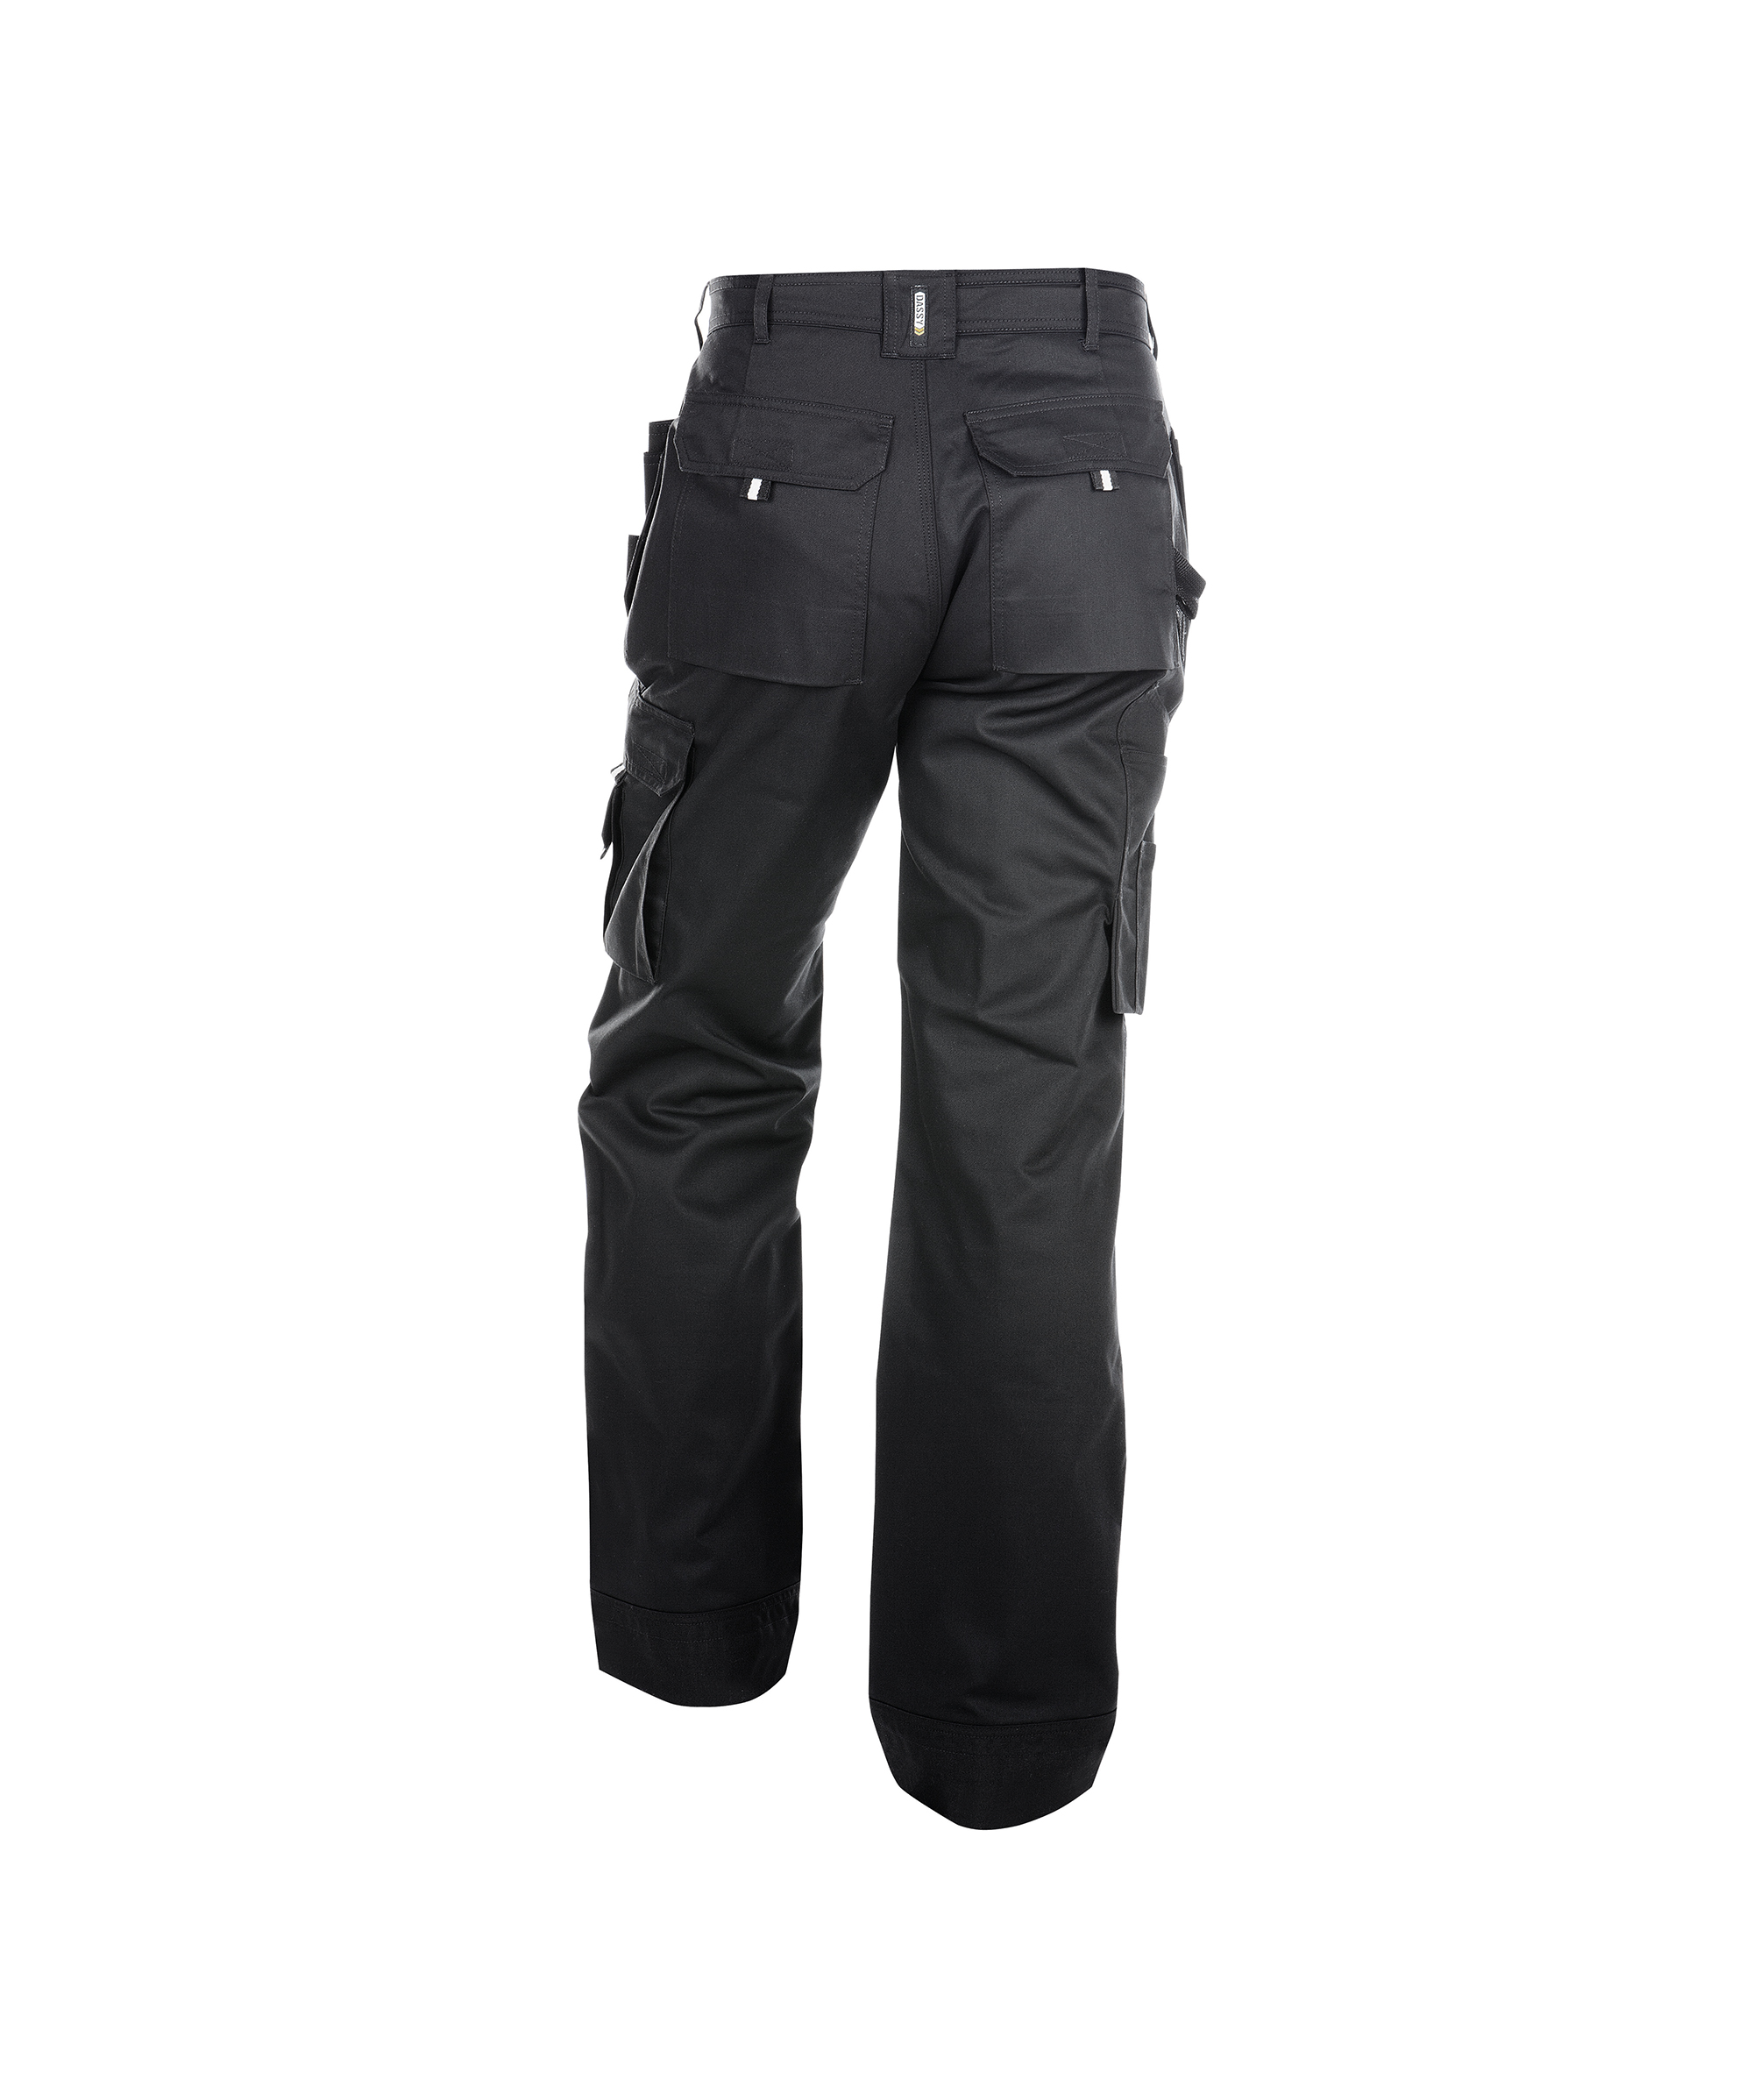 oxford_work-trousers-with-multi-pockets-and-knee-pockets_black_back.jpg